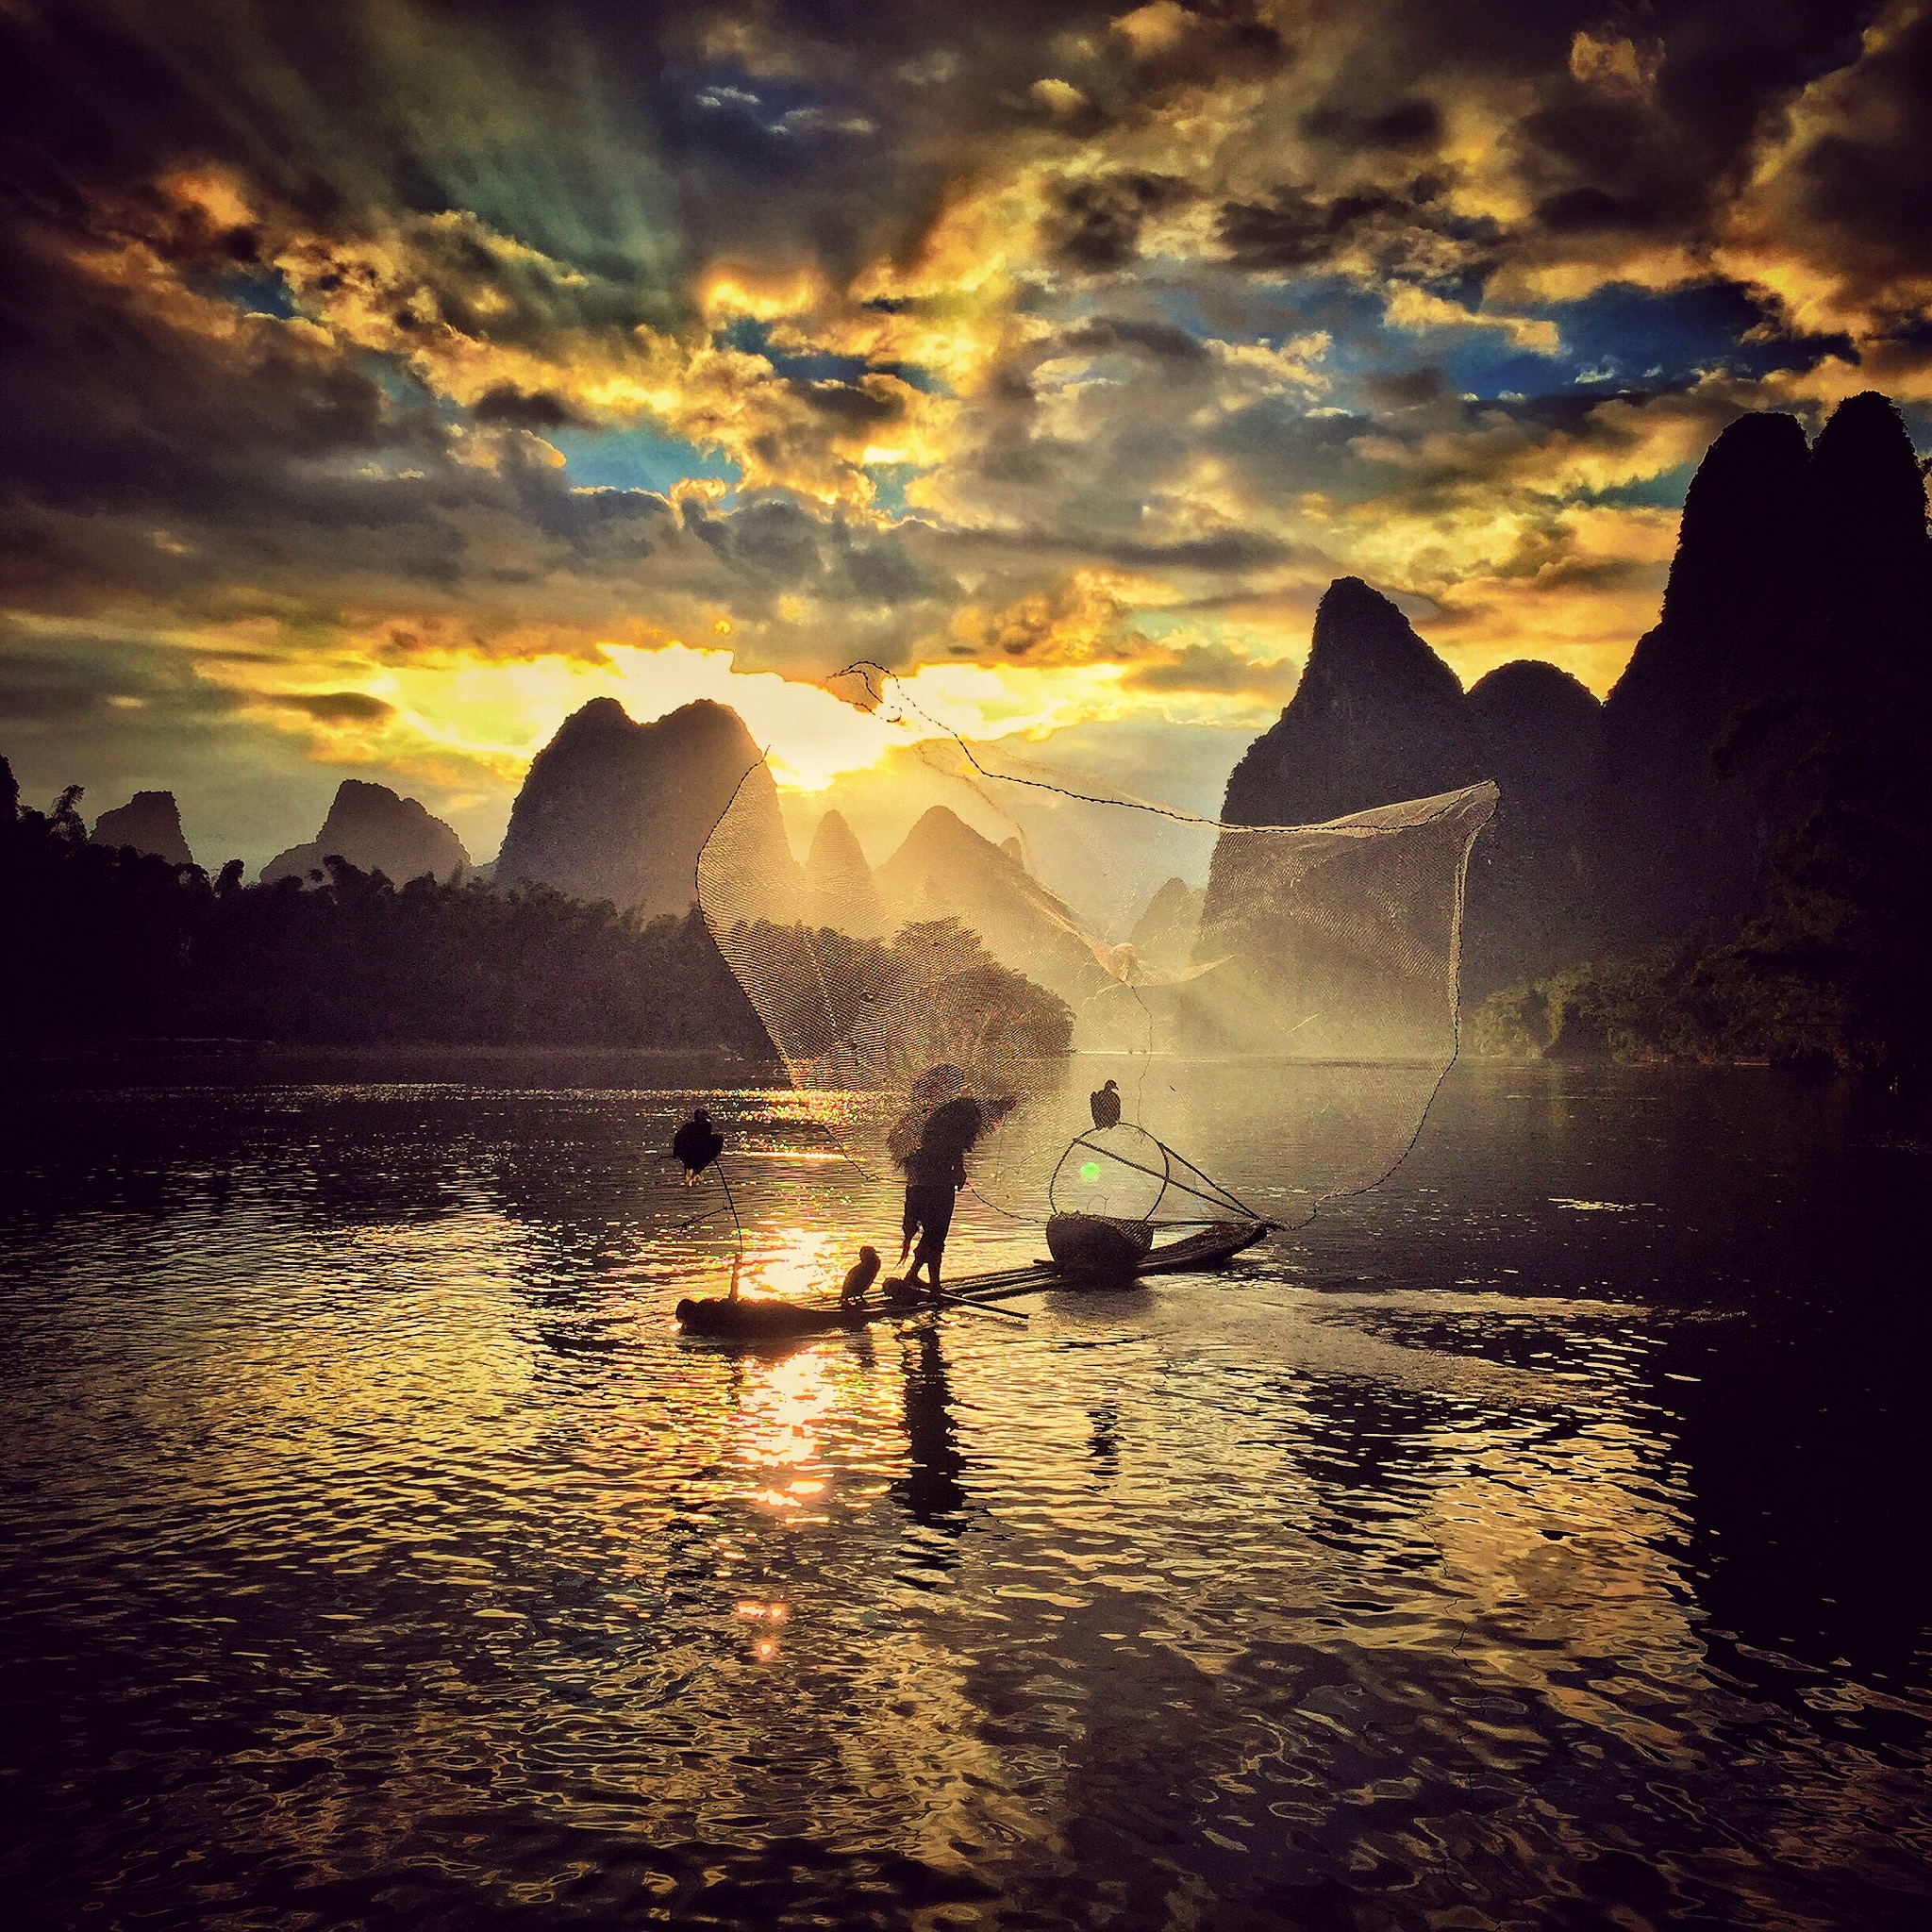 Photographers of the Year iPhone Photography Awards. Second Place Winner in the Sunset category.